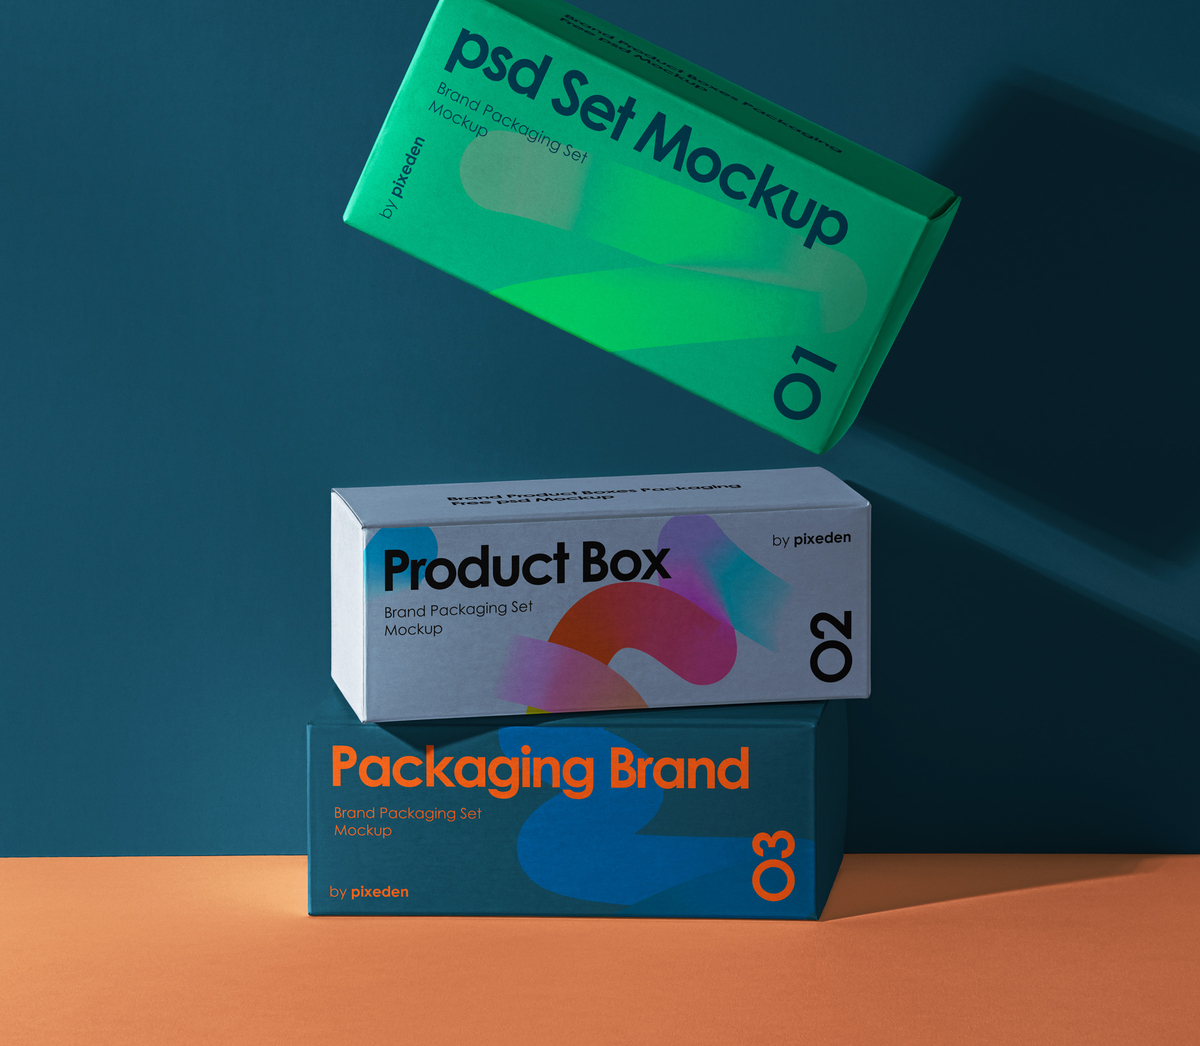 Psd Product Box Package Mockup | Pixeden Club